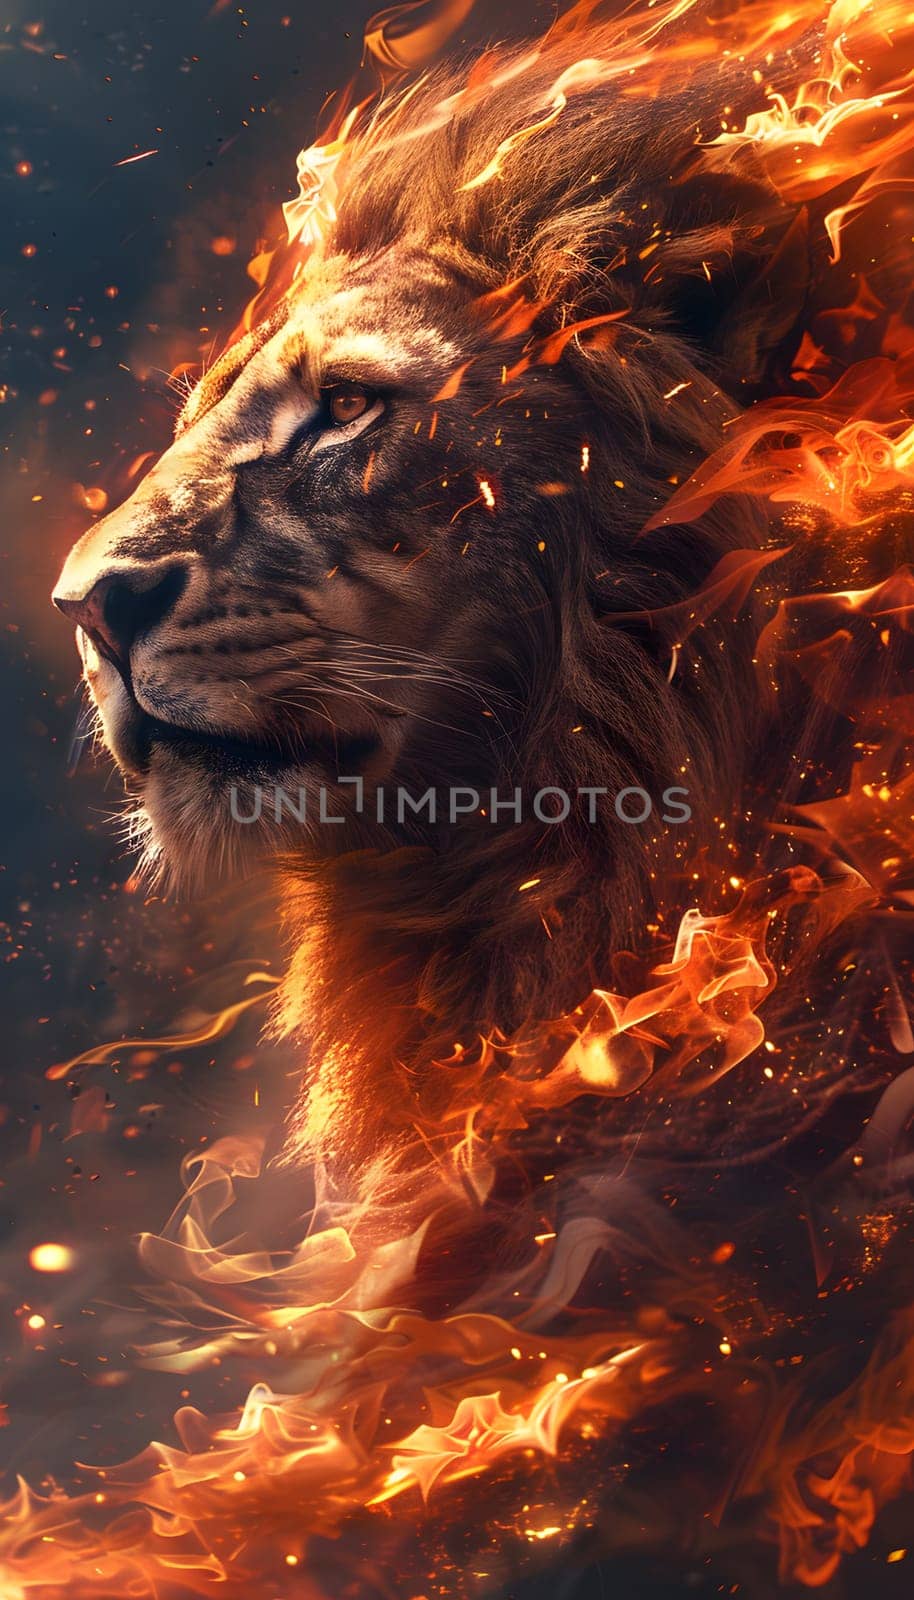 A flaming lion amidst darkness in a painted CG artwork by Nadtochiy